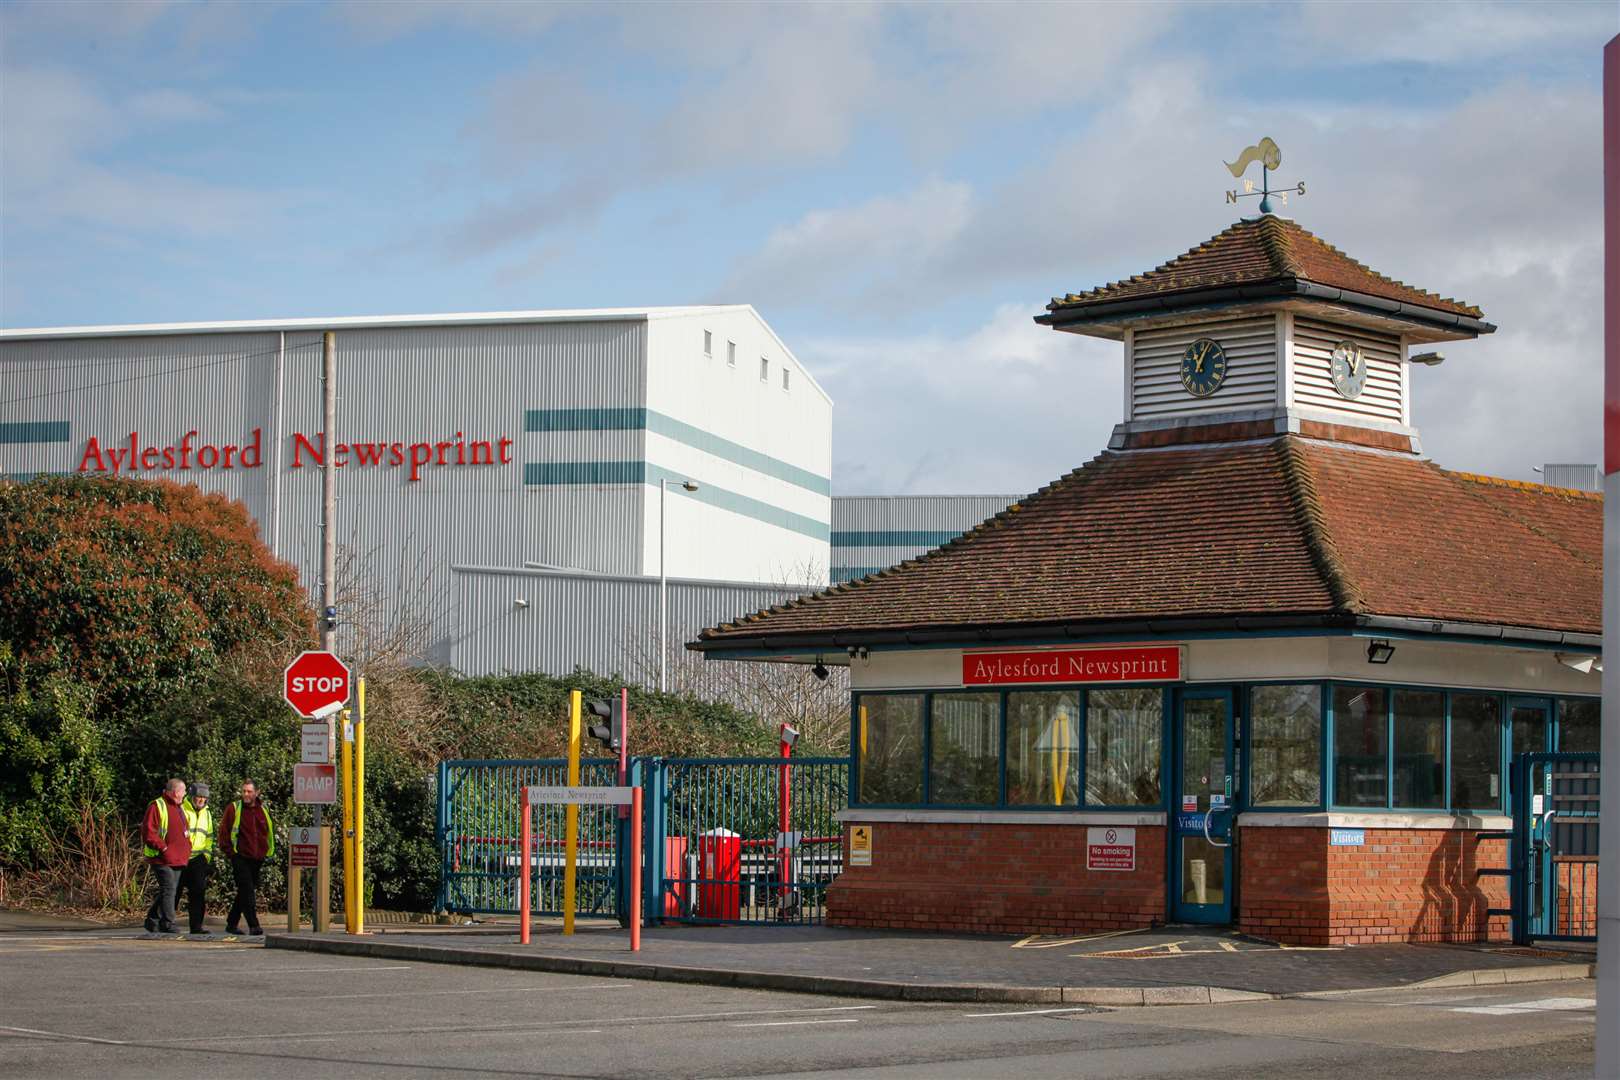 Aylesford Newsprint fell into administration in February last year